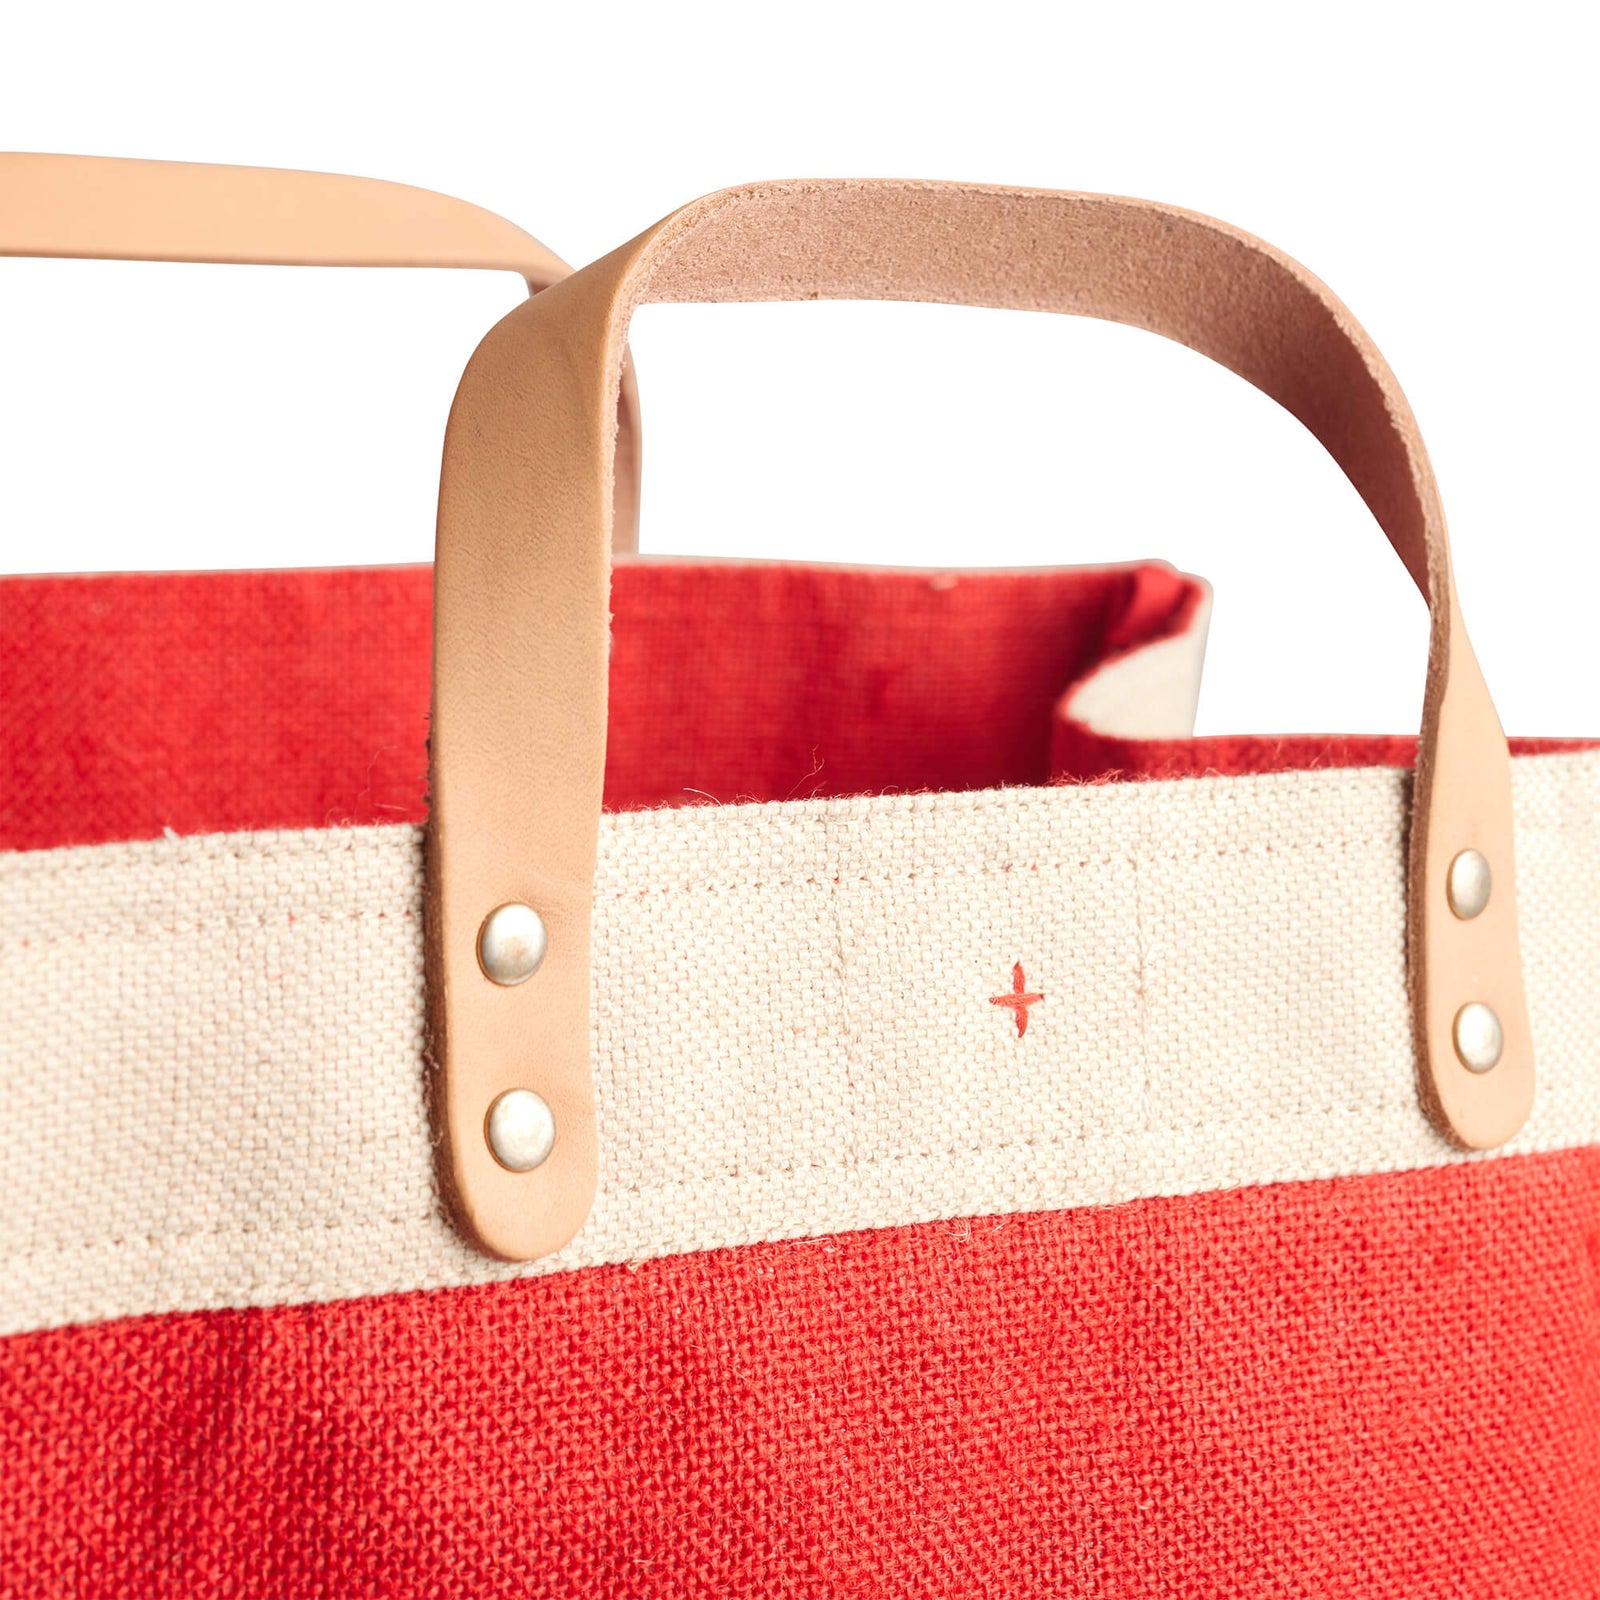 Customized Market Bag in Red - Wholesale